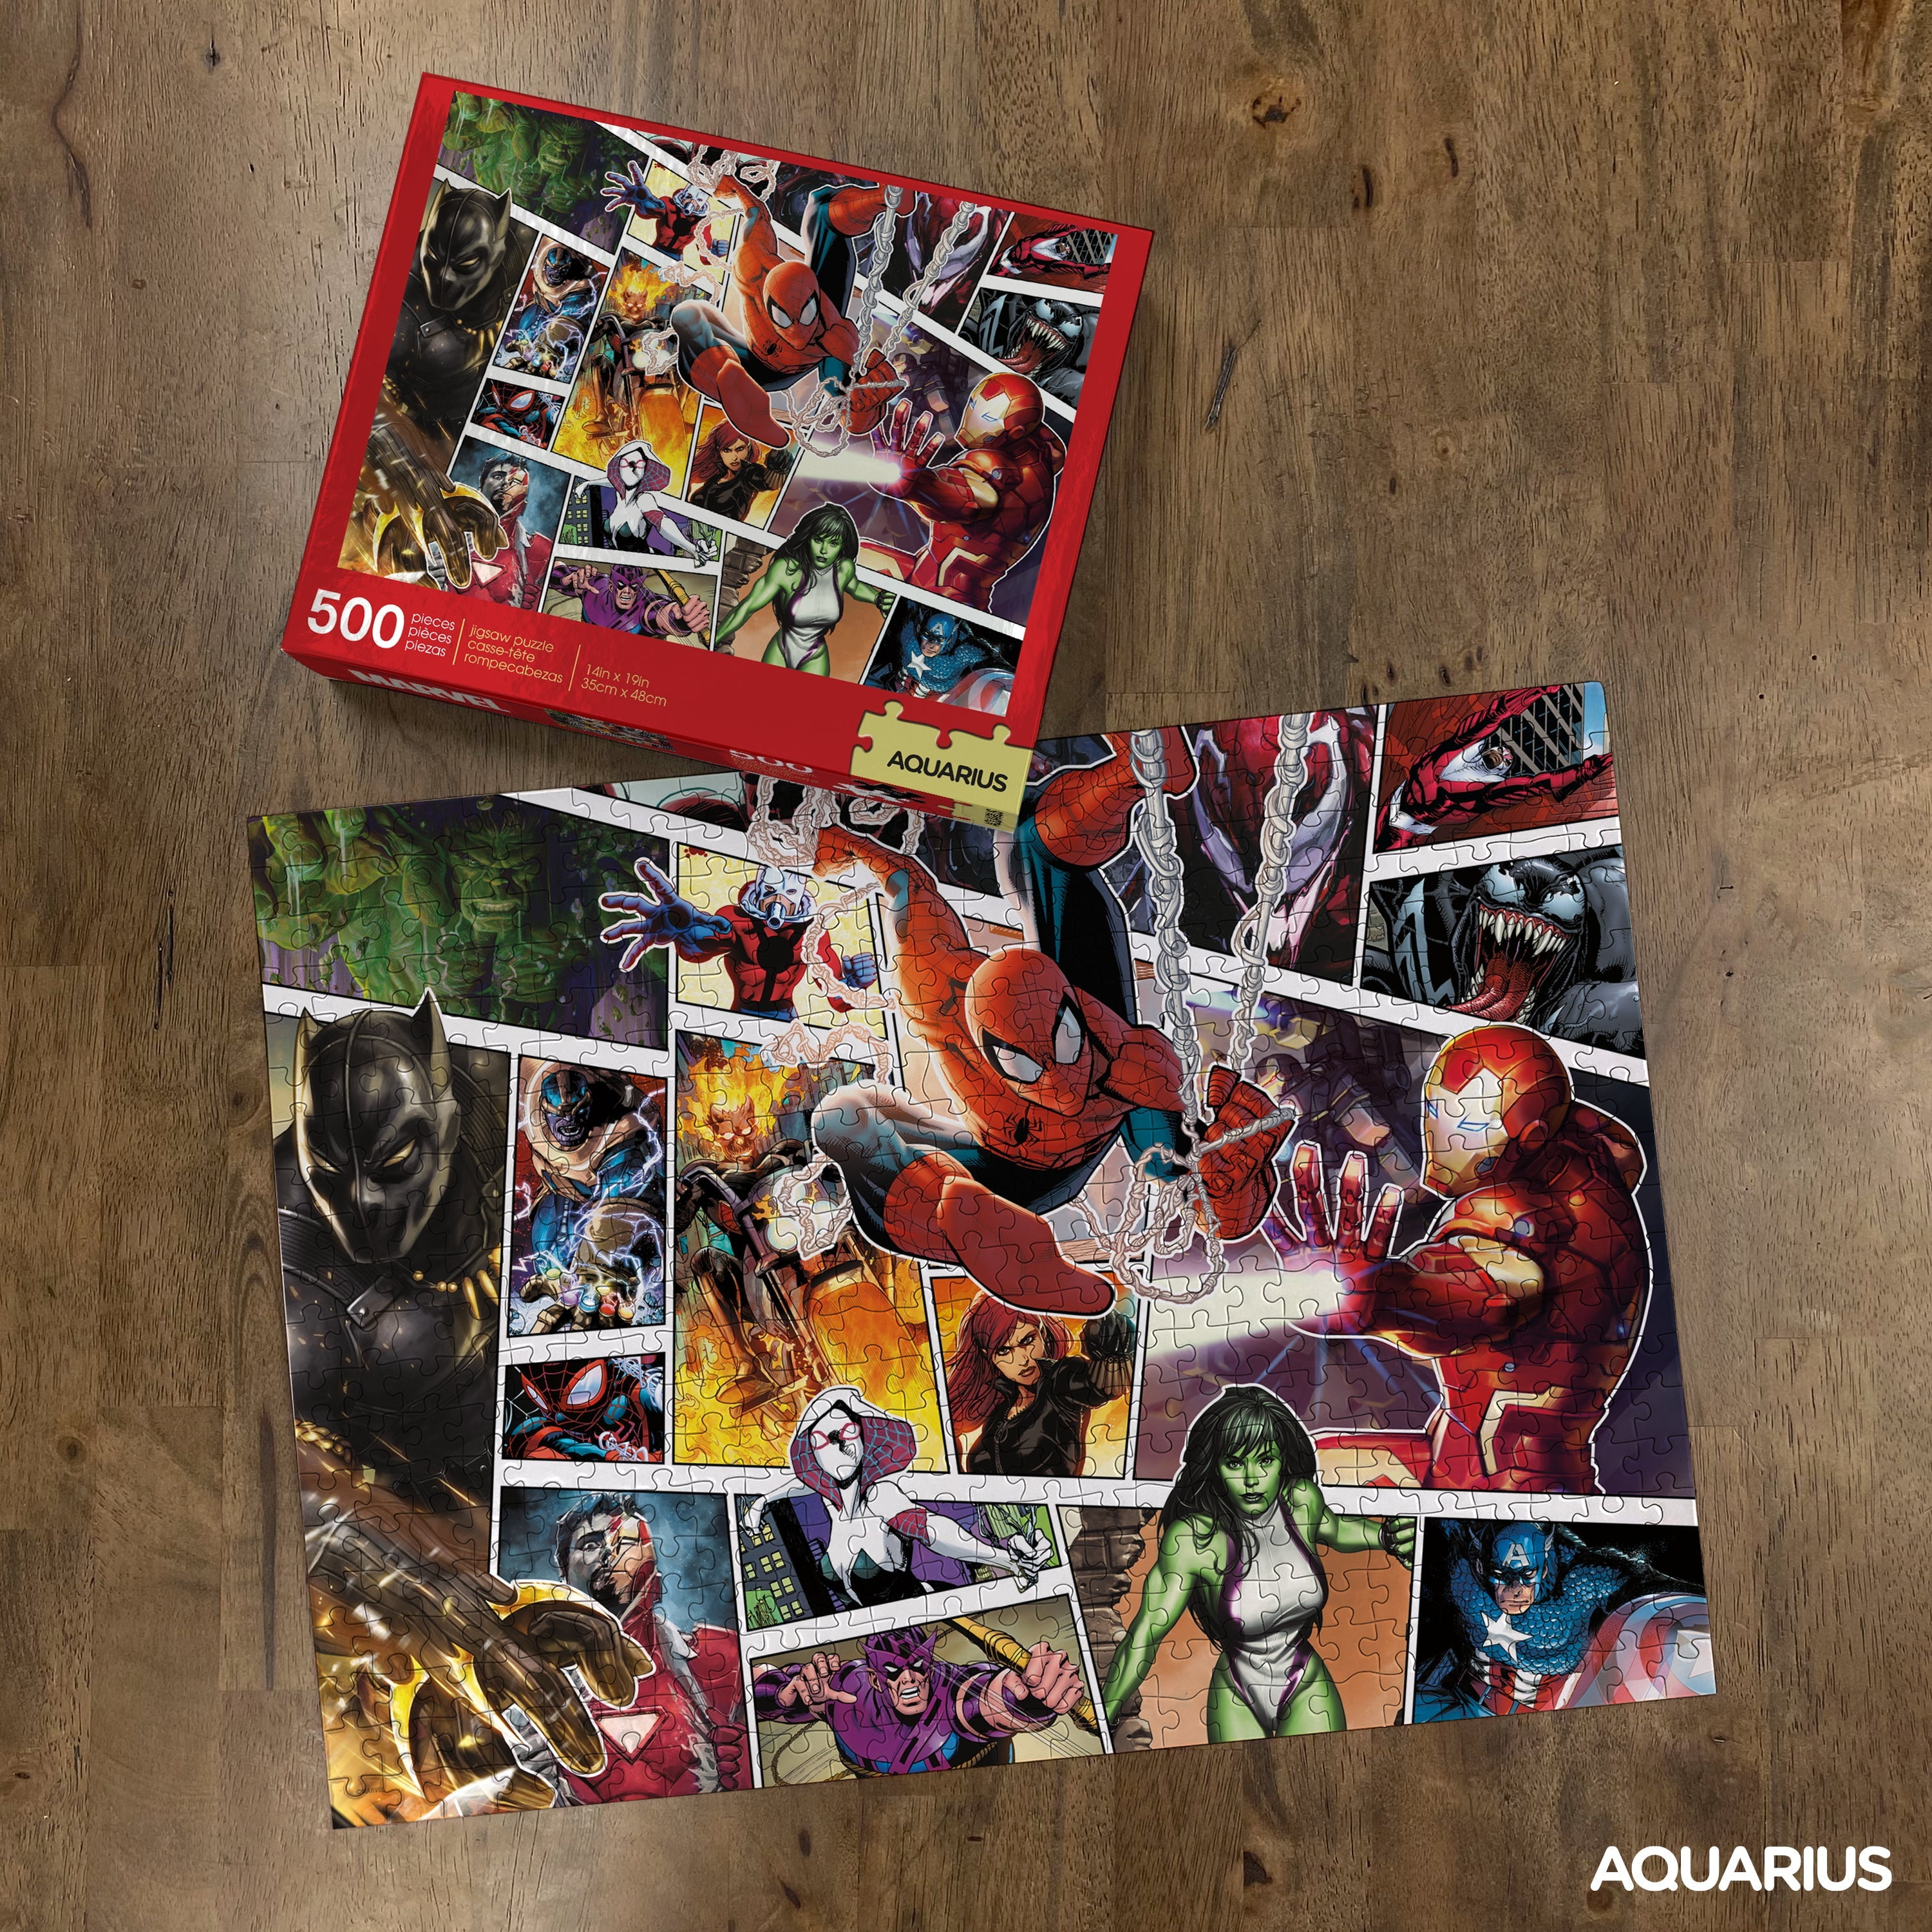 Marvel Super Heroes Puzzle Book